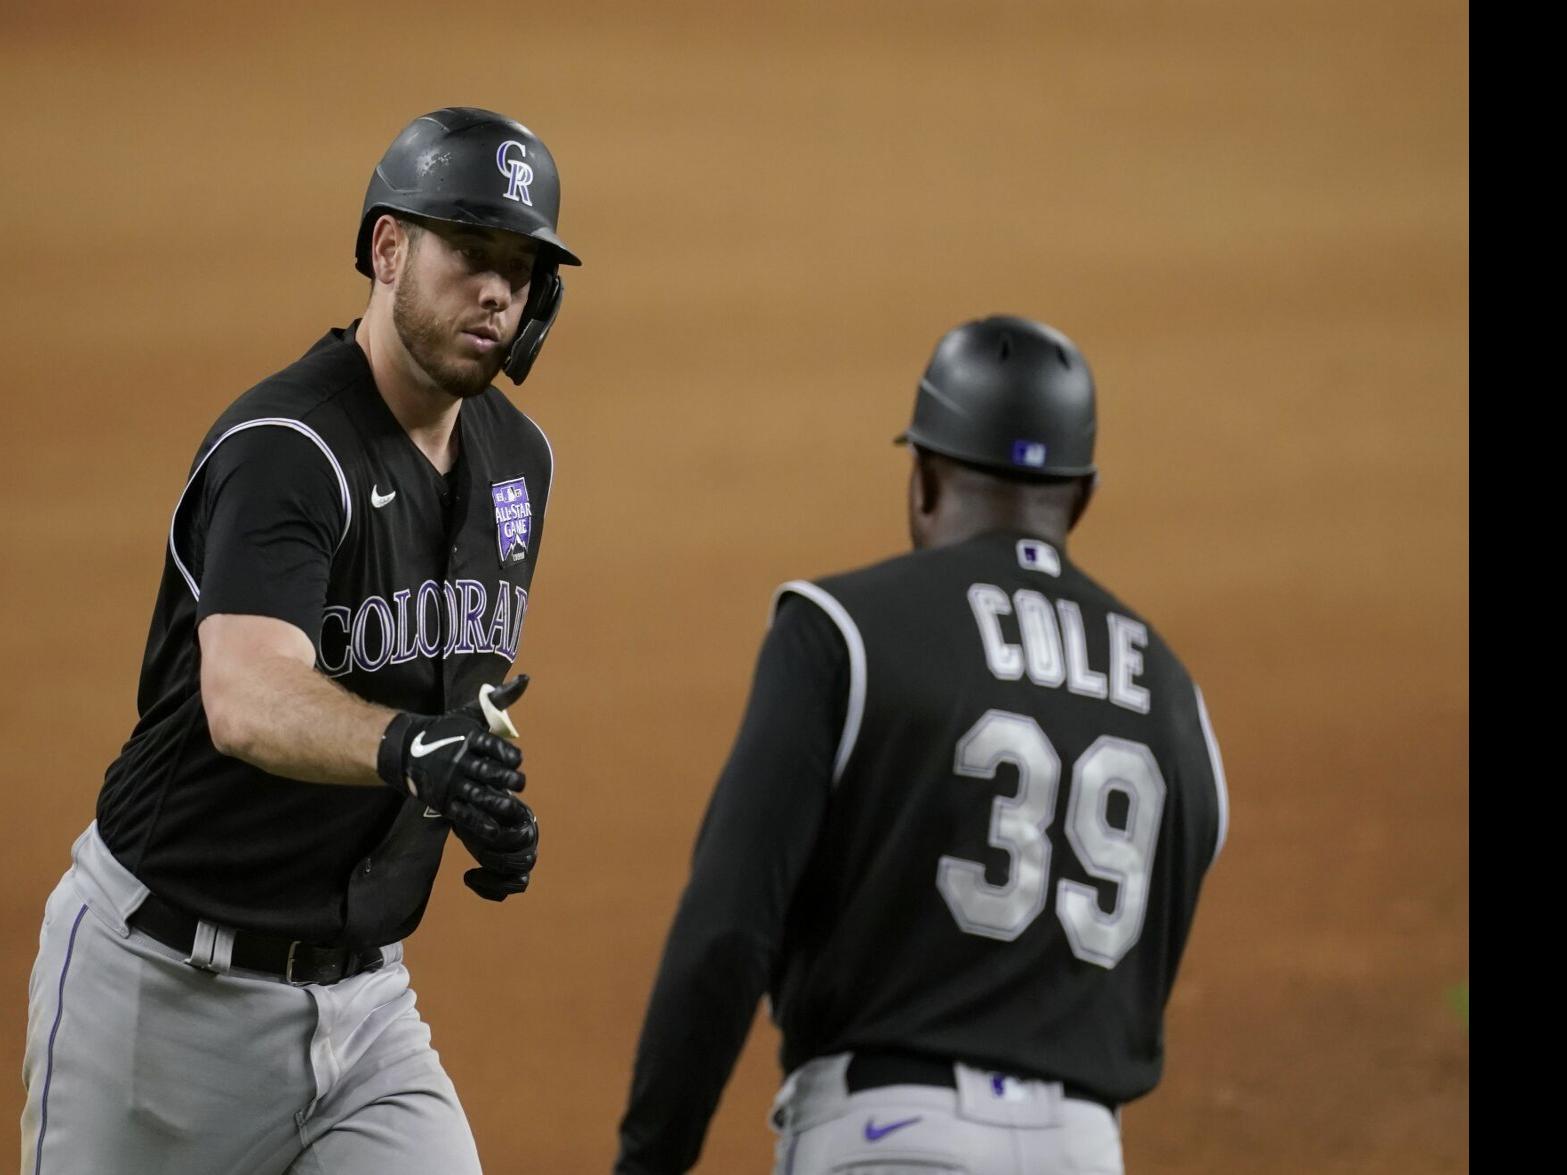 CJ Cron ends August with another home run, but Rockies fall again